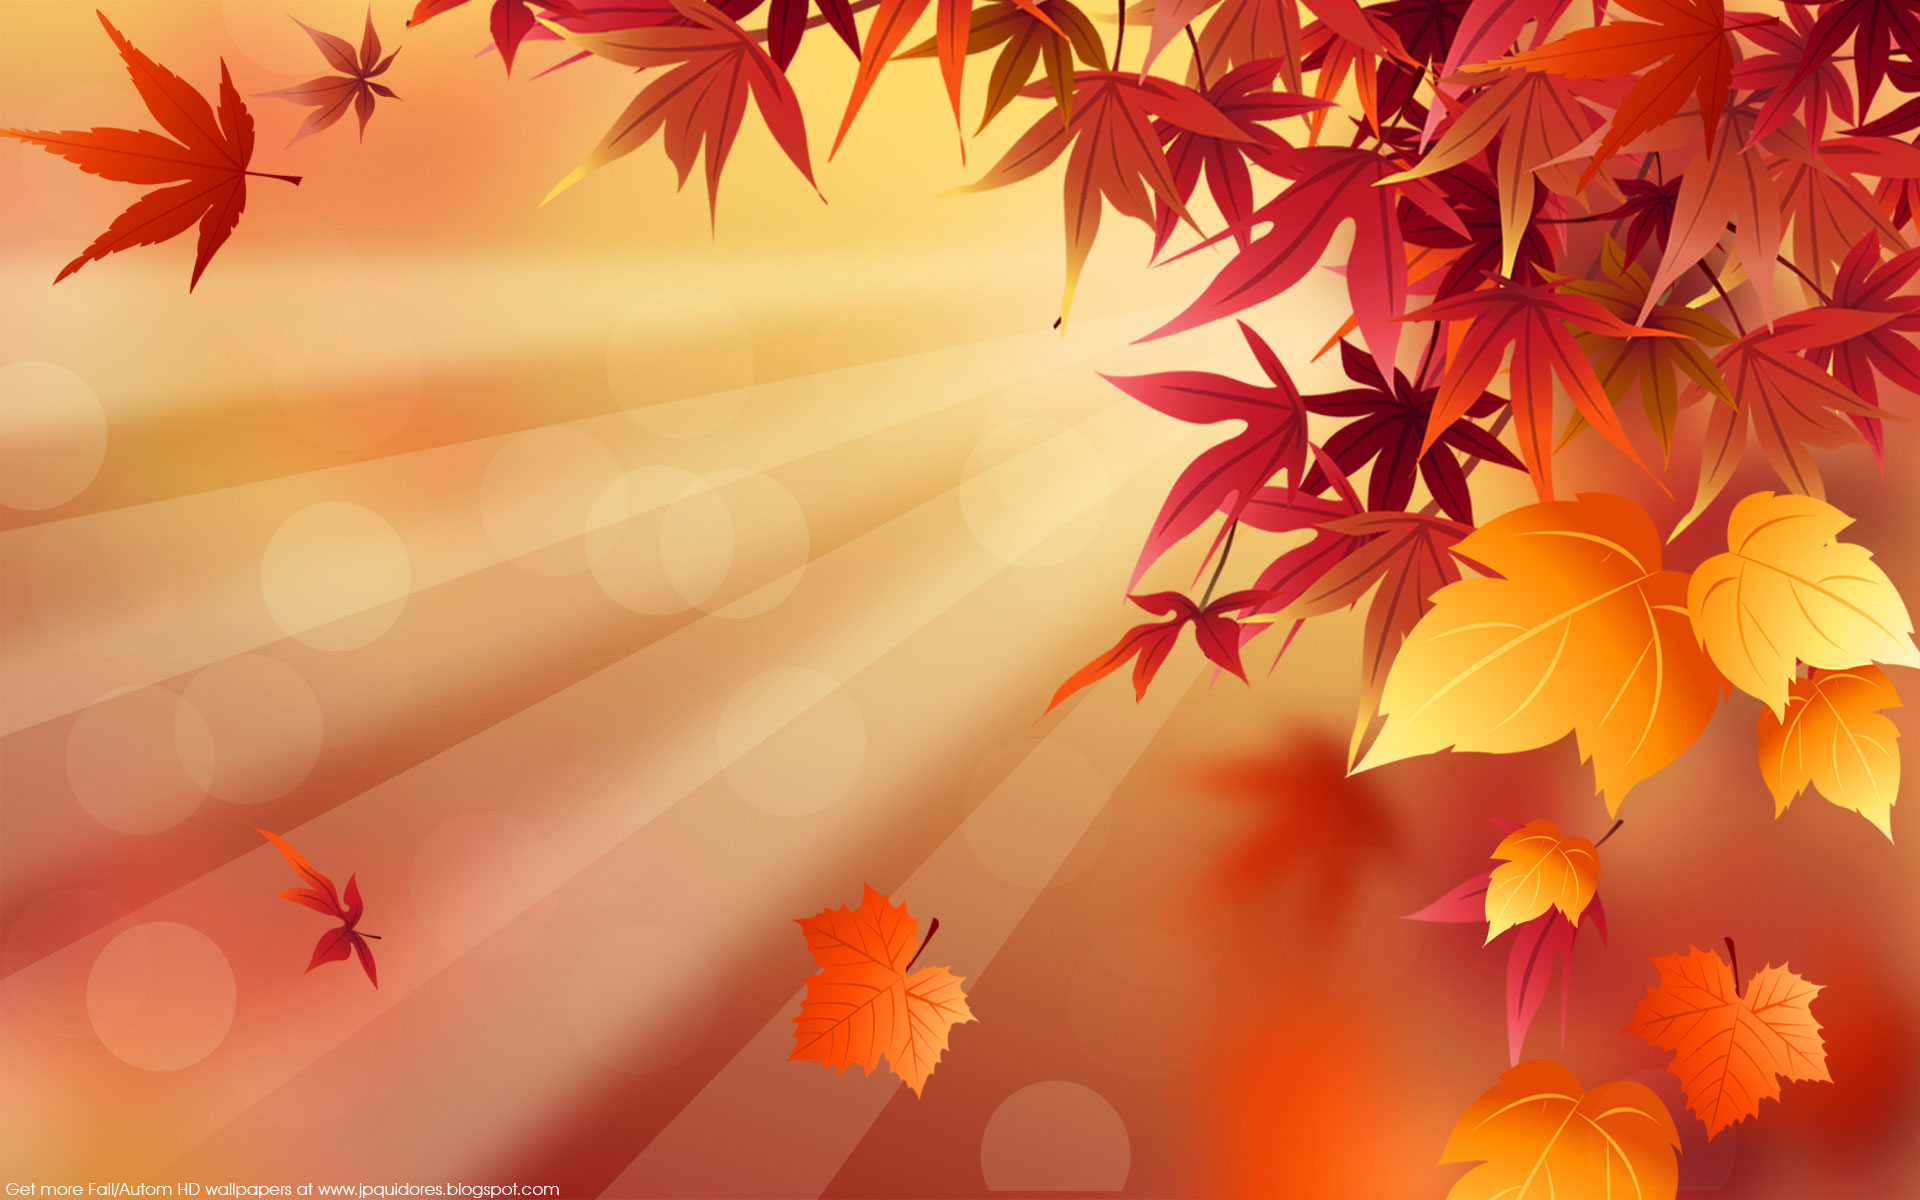 Here are great Fall Wallpaper. It is going to be a great Fall this year.